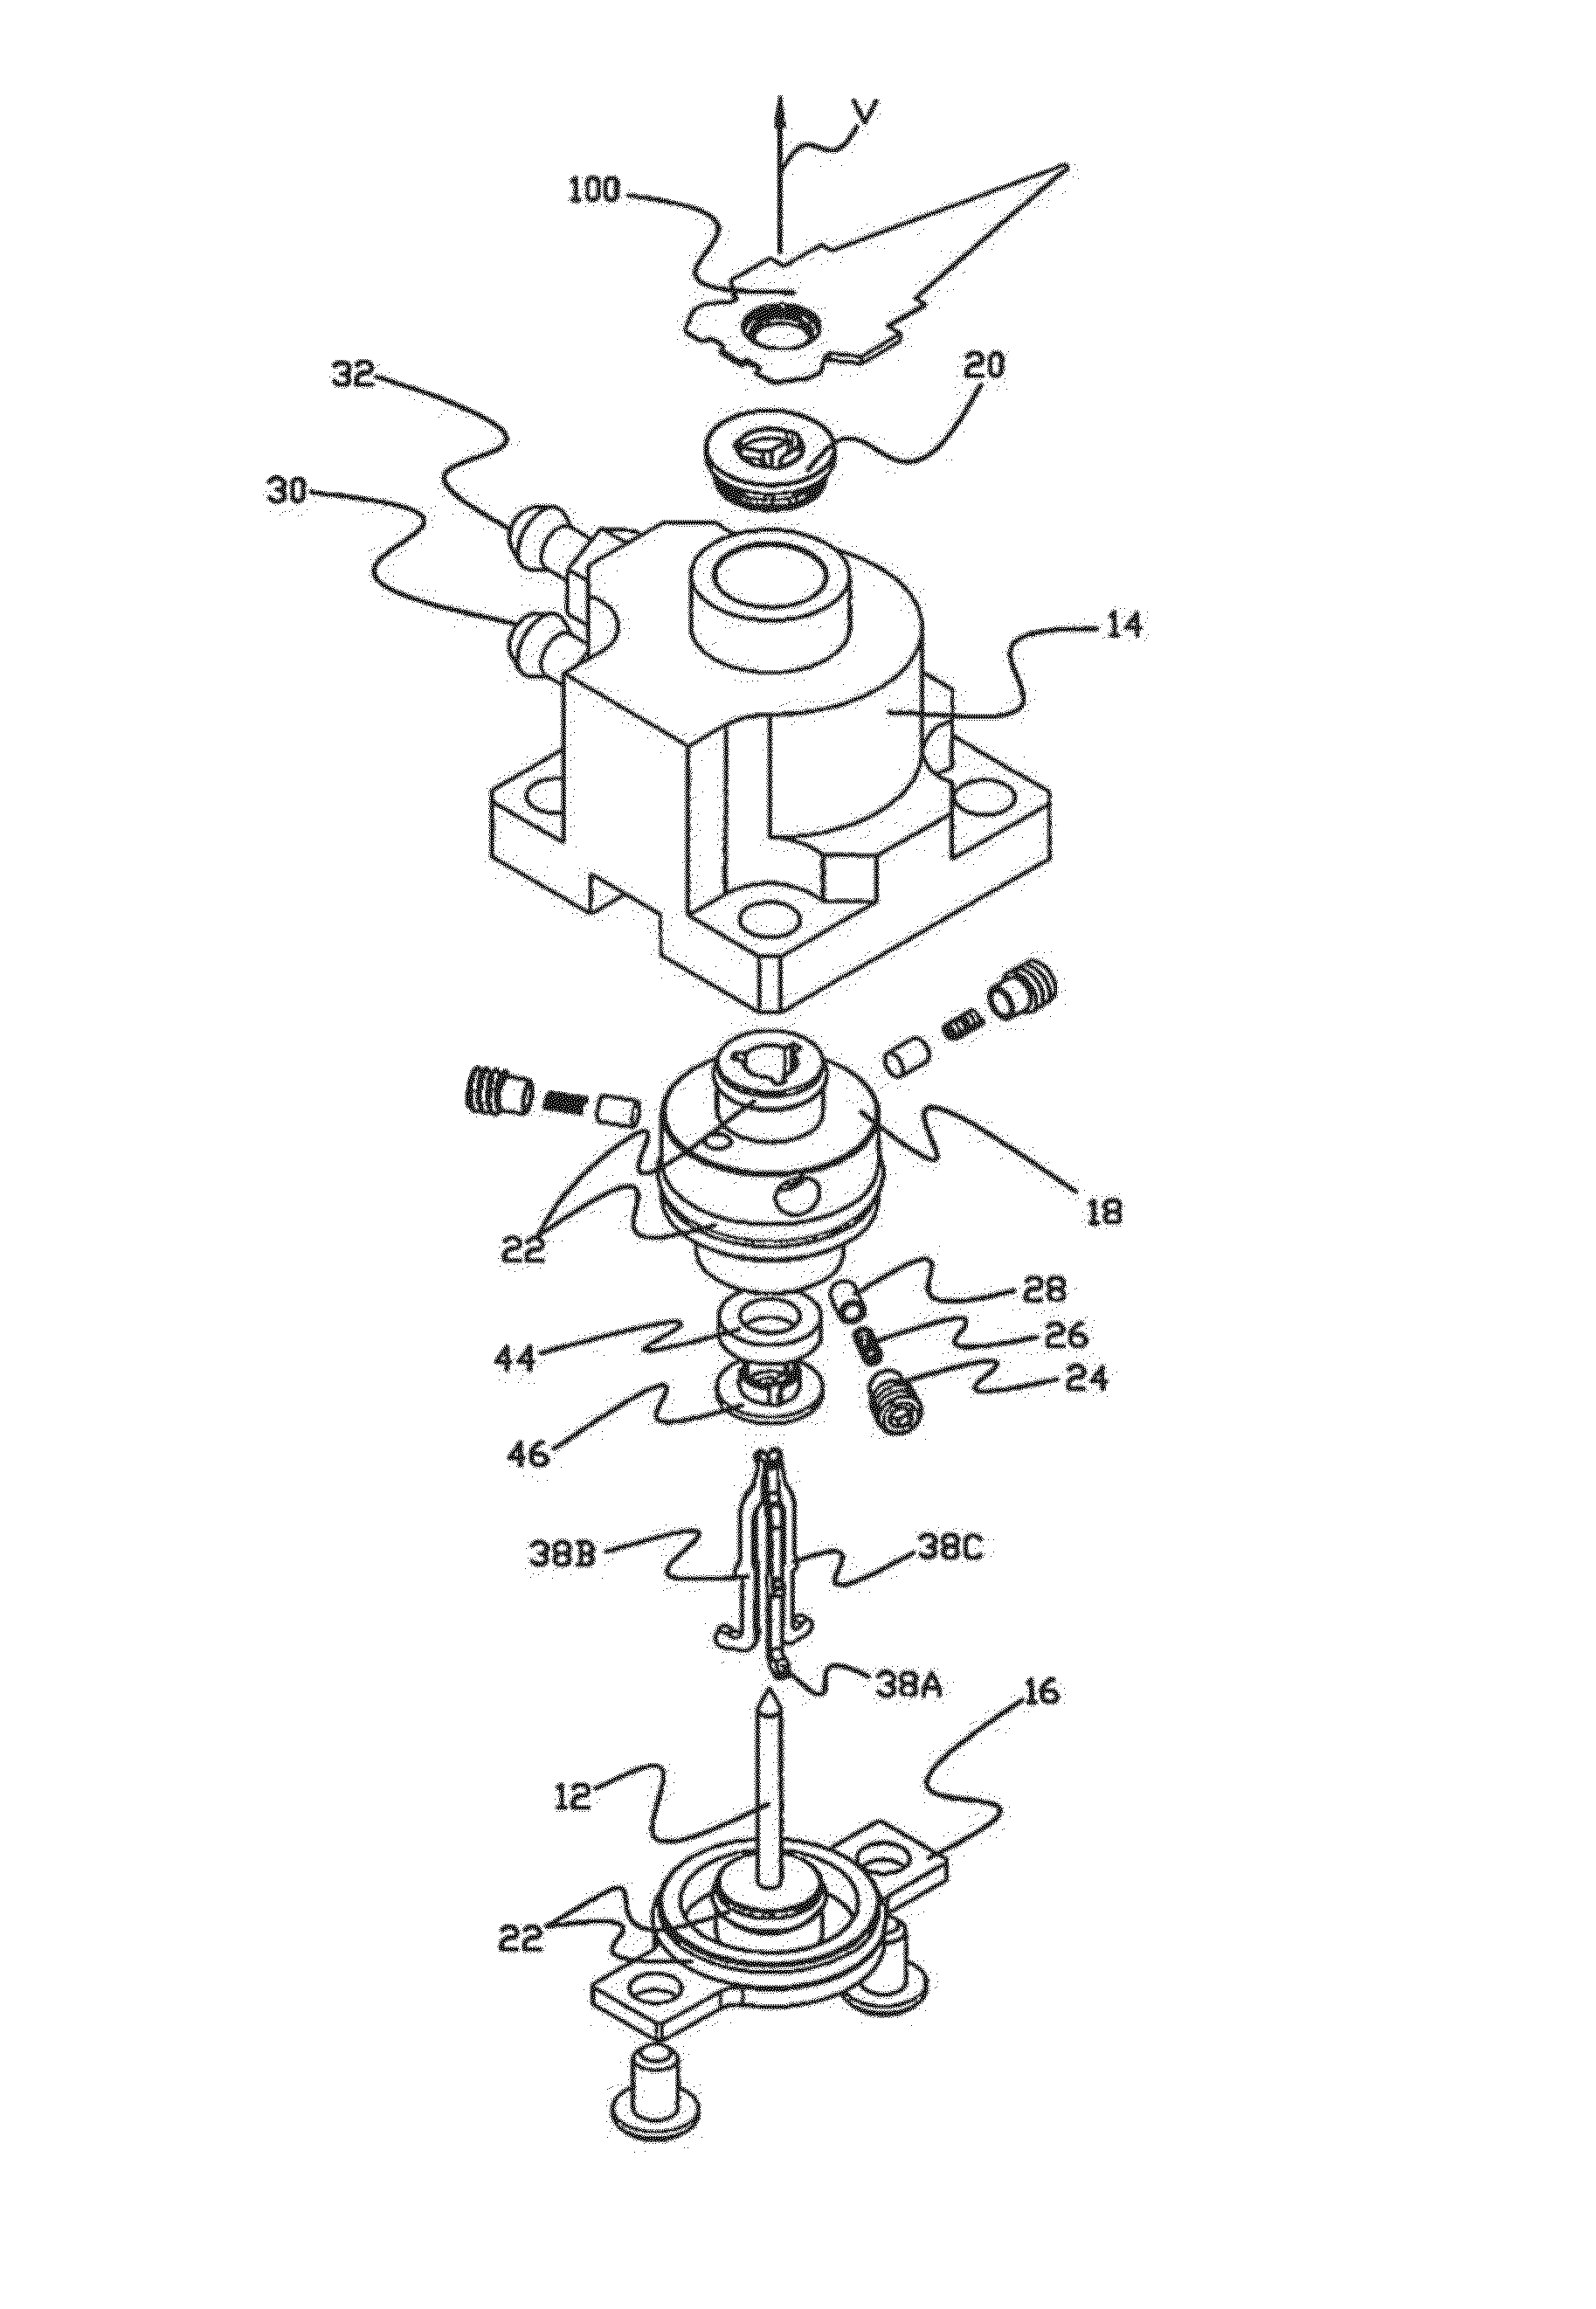 Head gimbal assembly (HGA) mounting apparatus for a magnetic head and disk tester